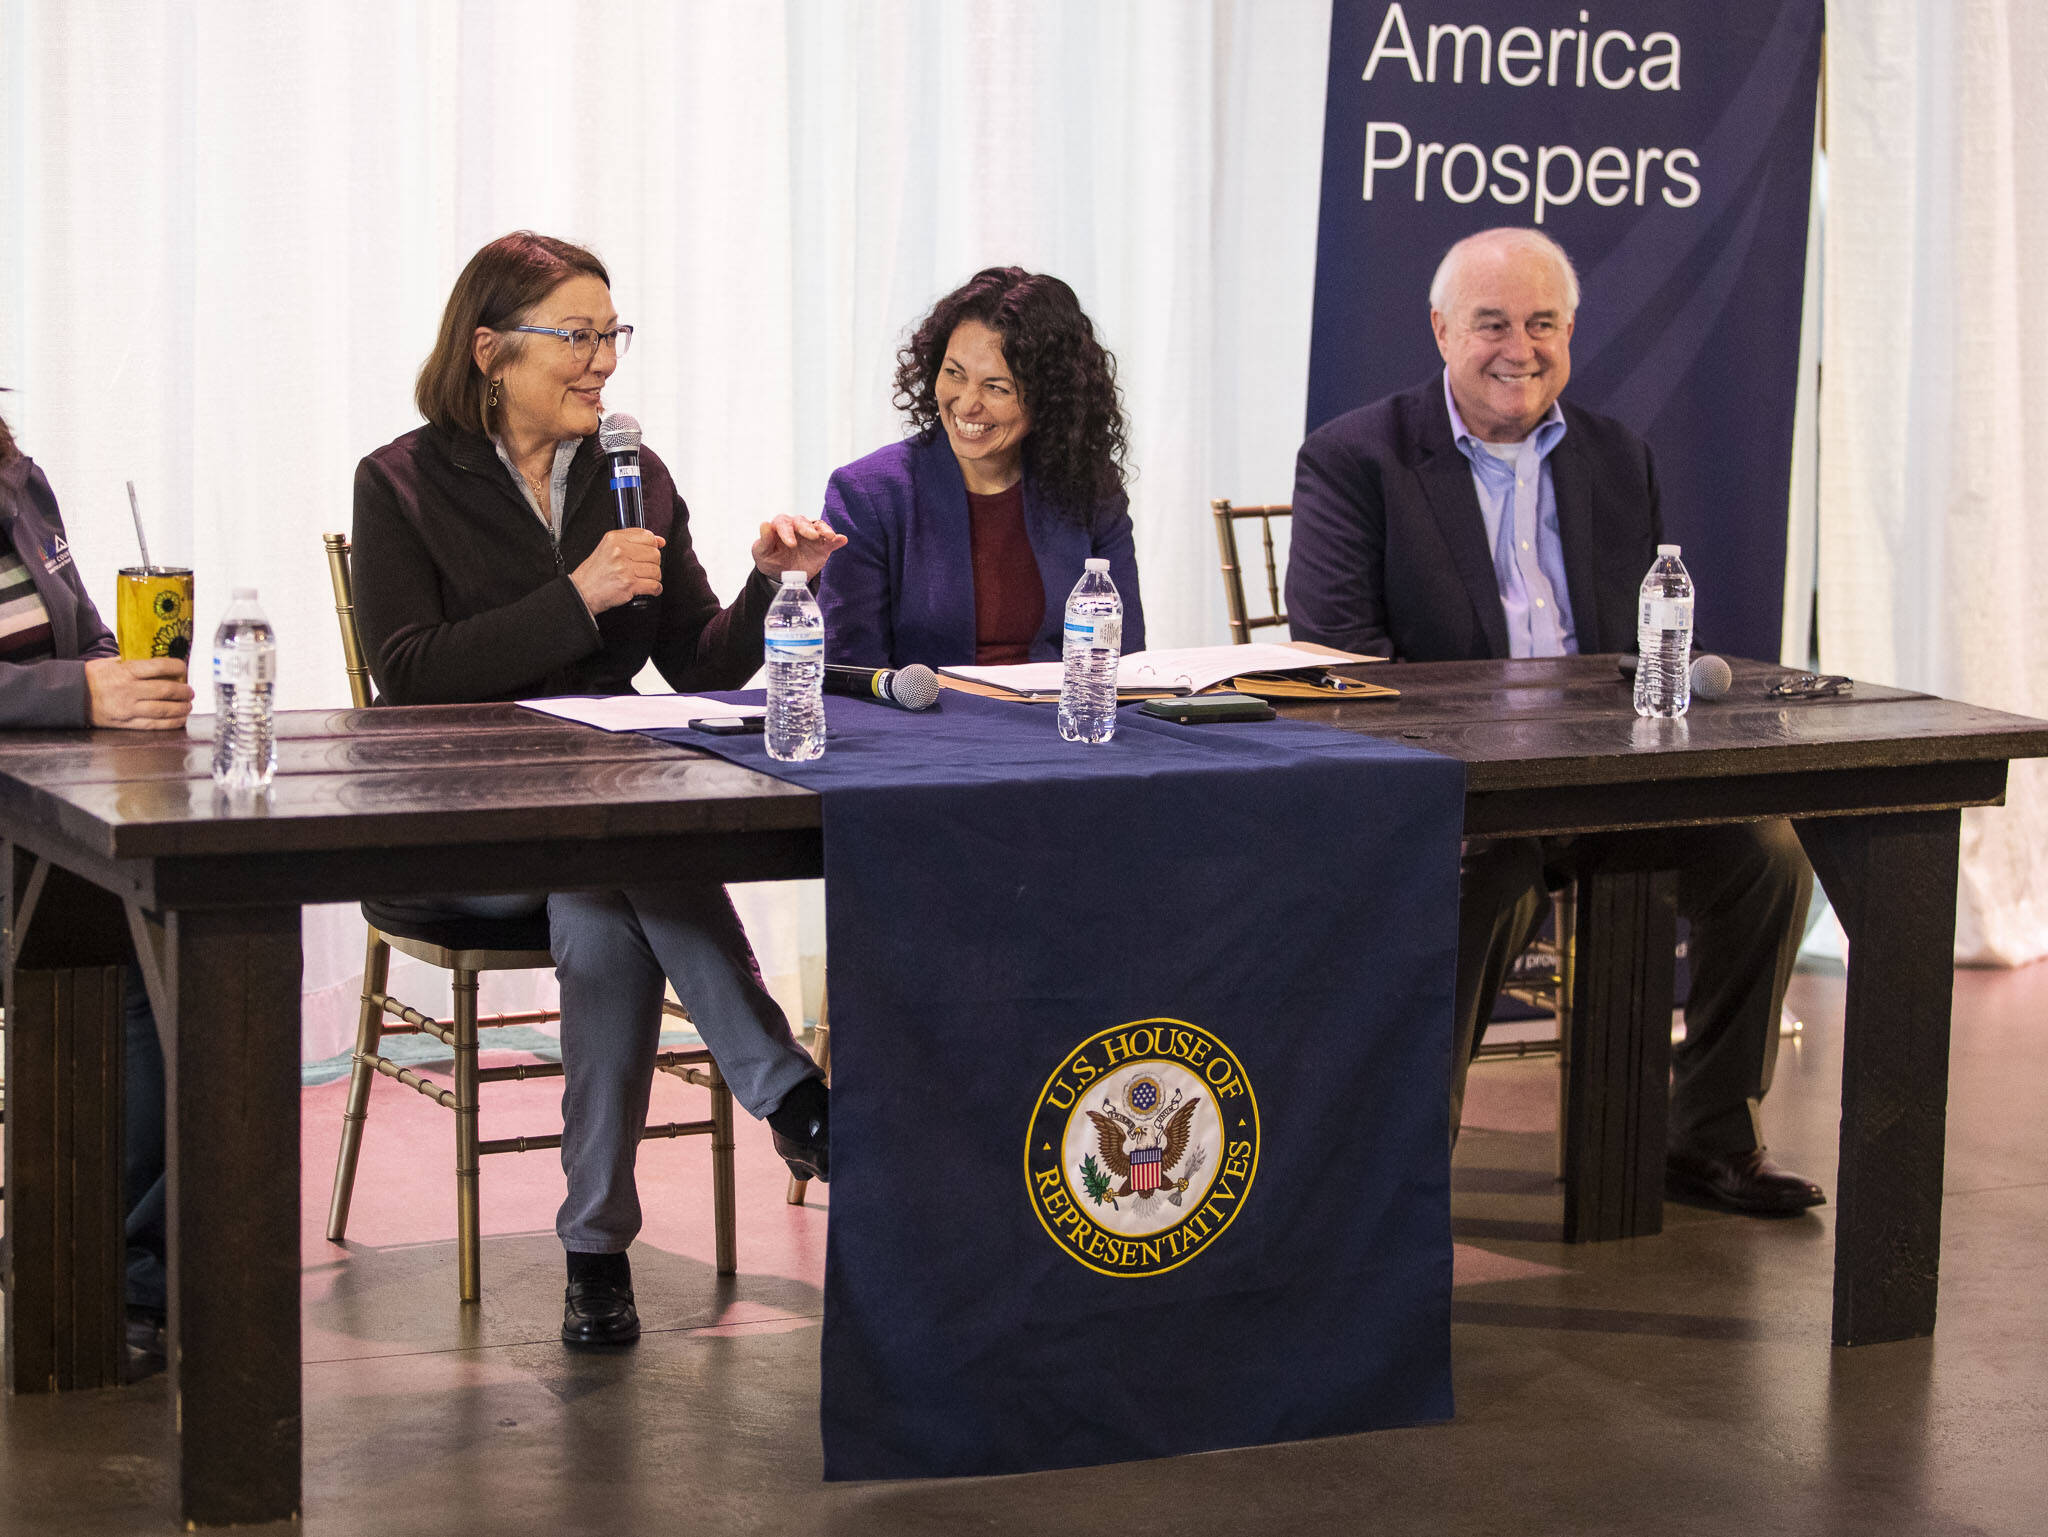 Rep. Suzan DelBene, left, introduces Xichitl Torres Small, center, Undersecretary for Rural Development with the U.S. Department of Agriculture during a talk at Thomas Family Farms on Monday, April 3, 2023, in Snohomish, Washington. (Olivia Vanni / The Herald)